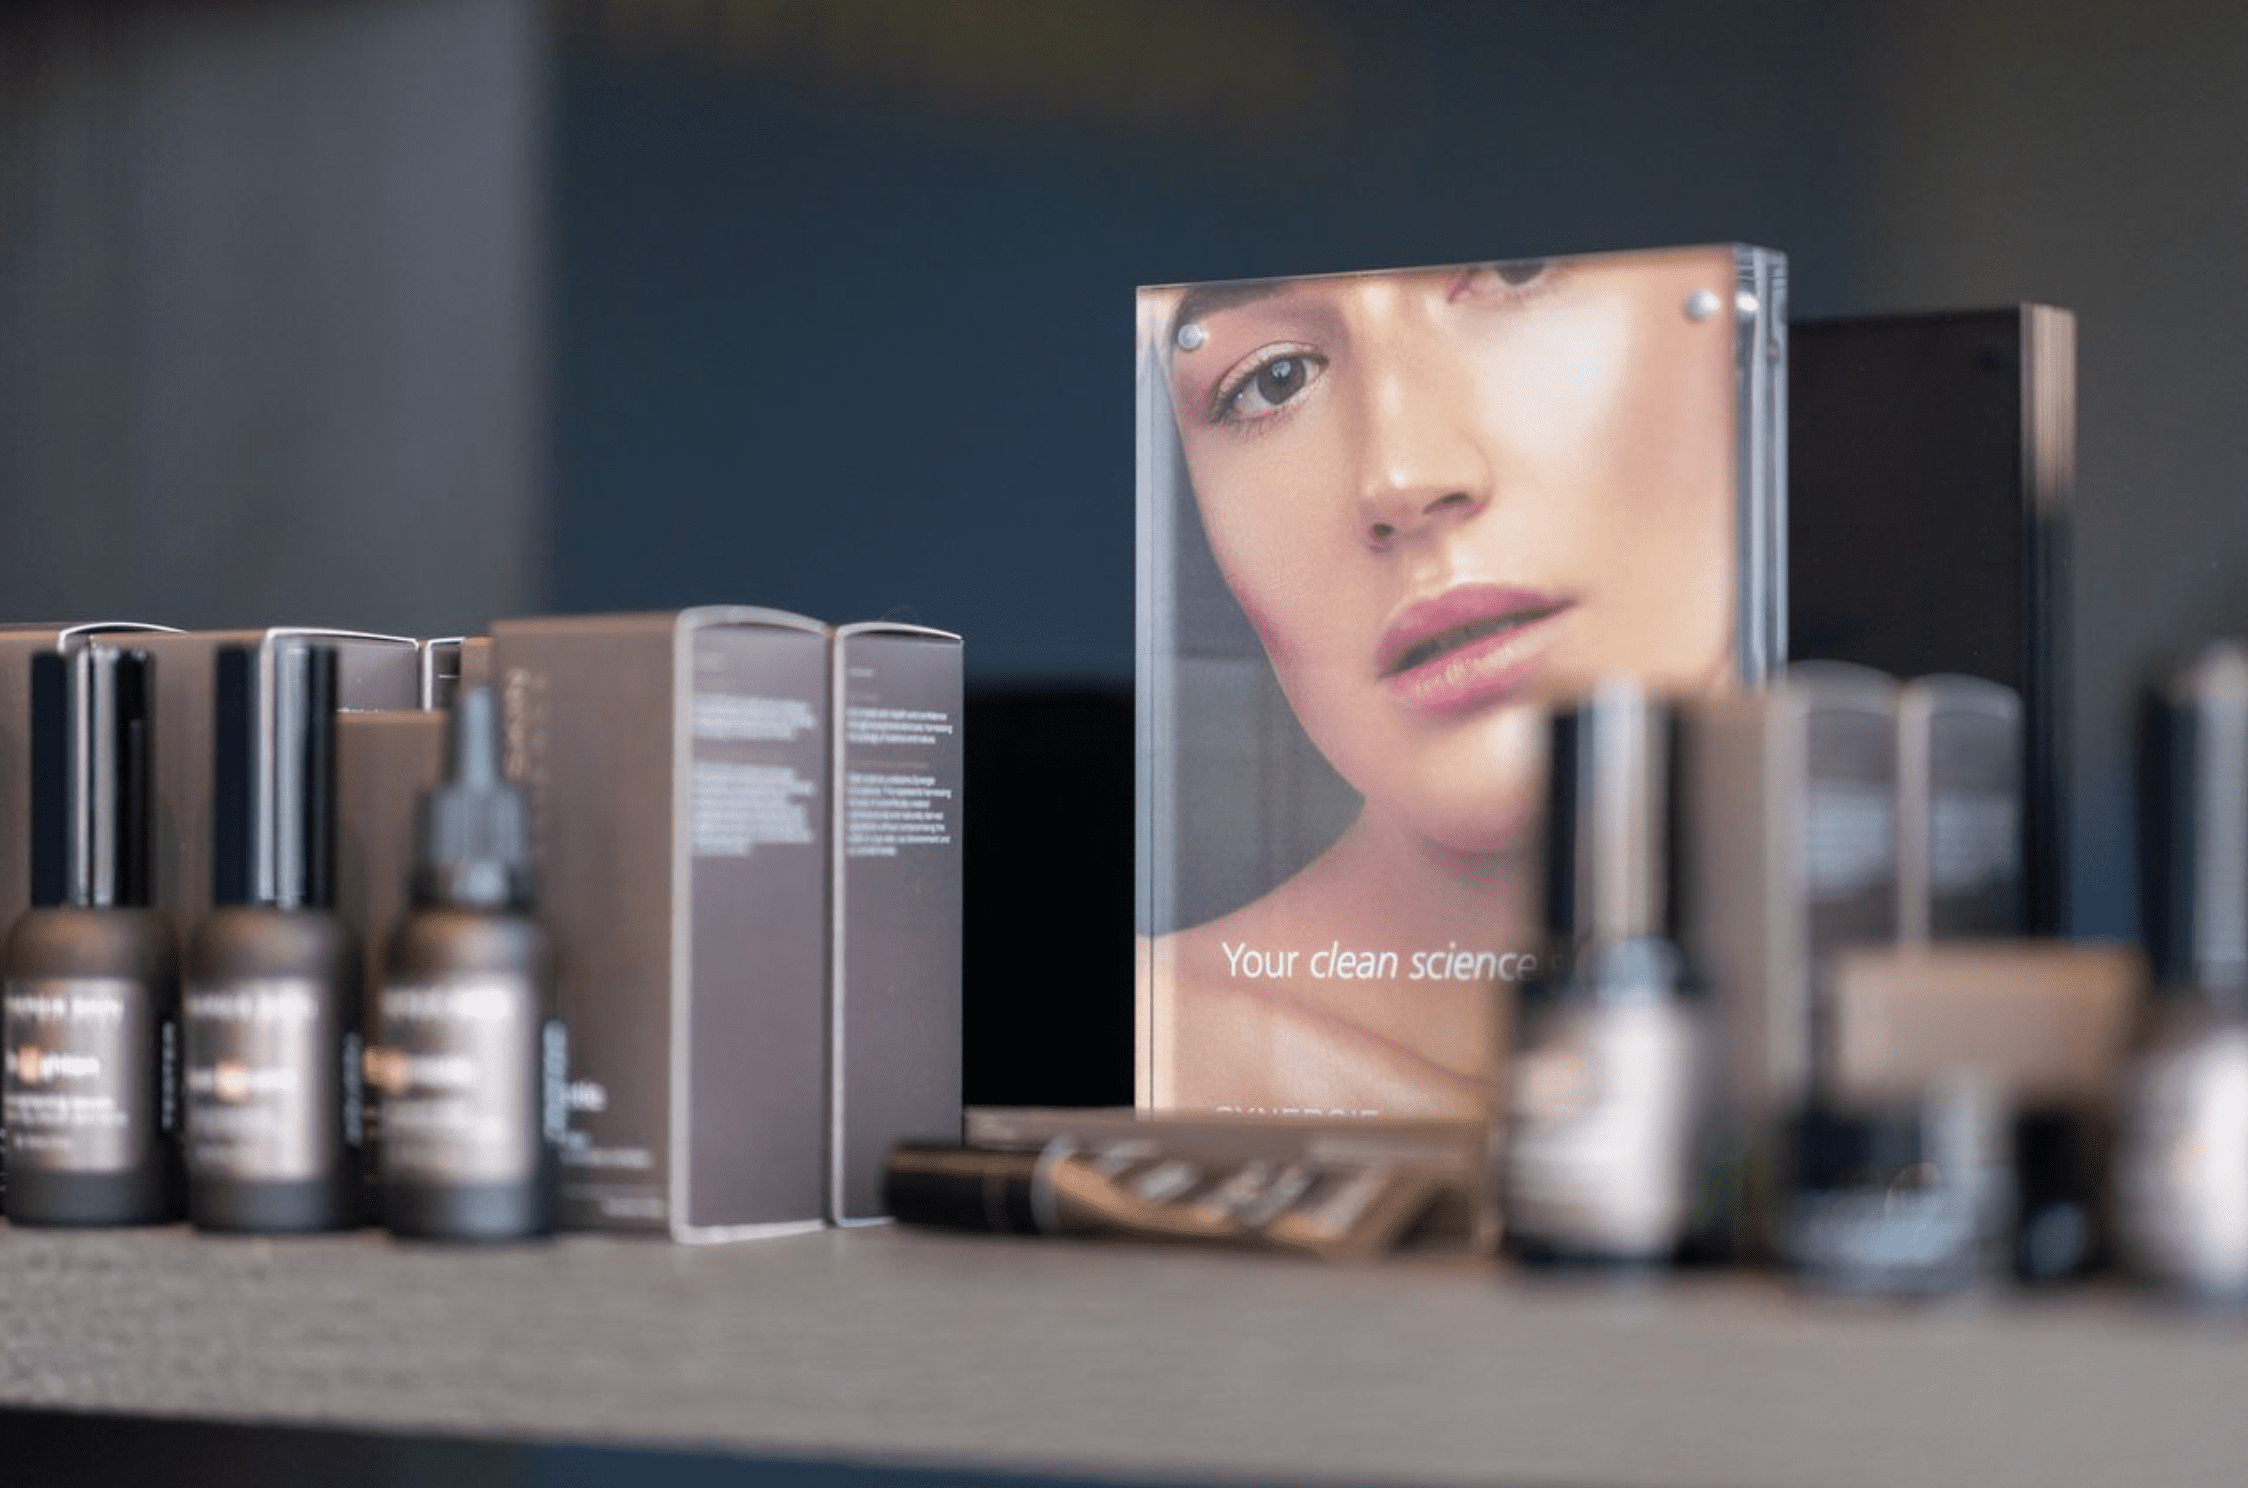 A display of various skincare products with a prominent advertisement featuring a close-up portrait of a woman's face and the caption "your clean science" in a modern, sleek setting.